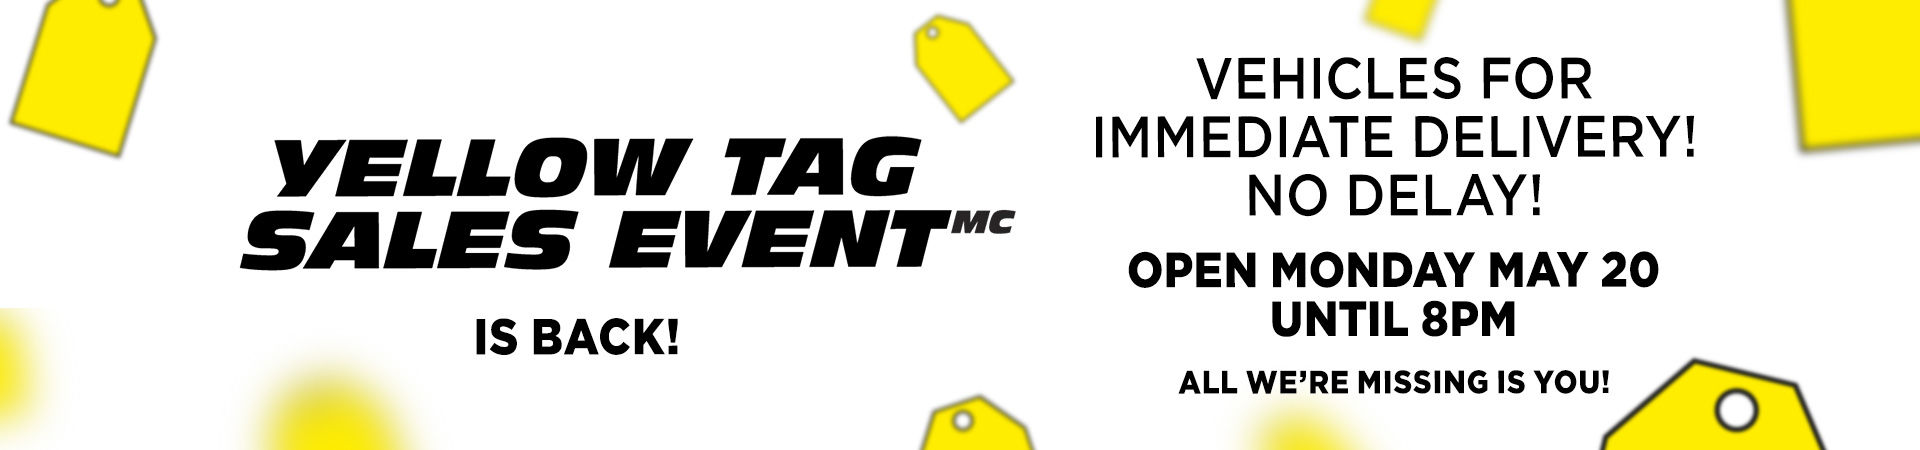 Yellow tag sales event